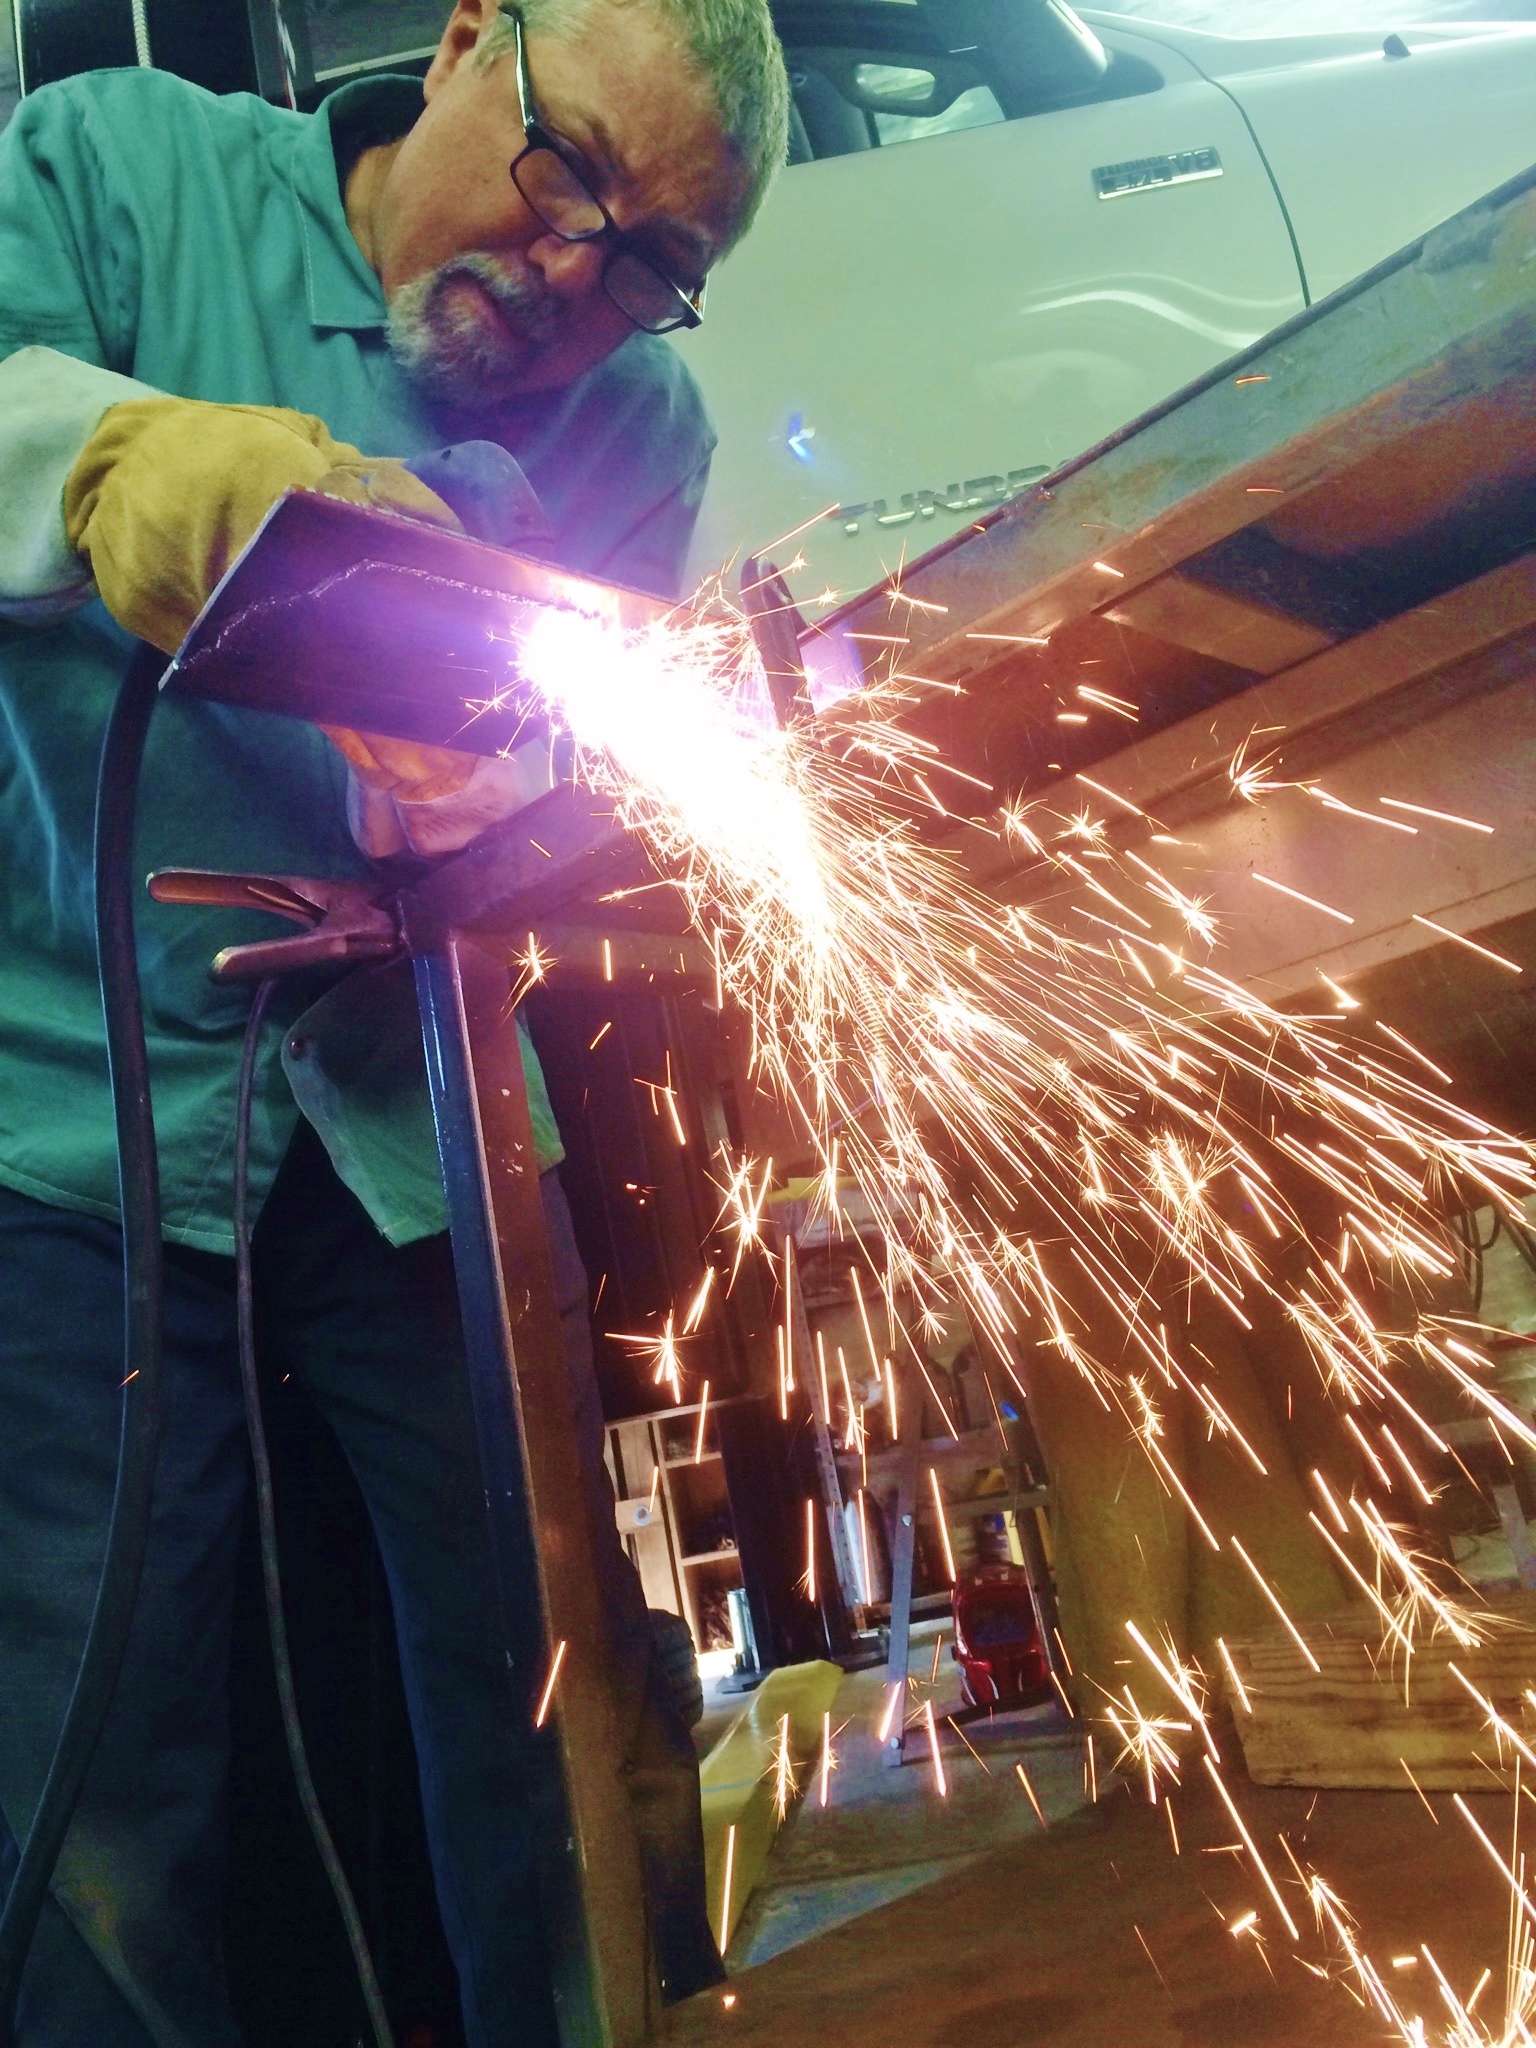 Here a tech uses a torch to fabricate a custom bracket for Adrian Avenaâs rig. 